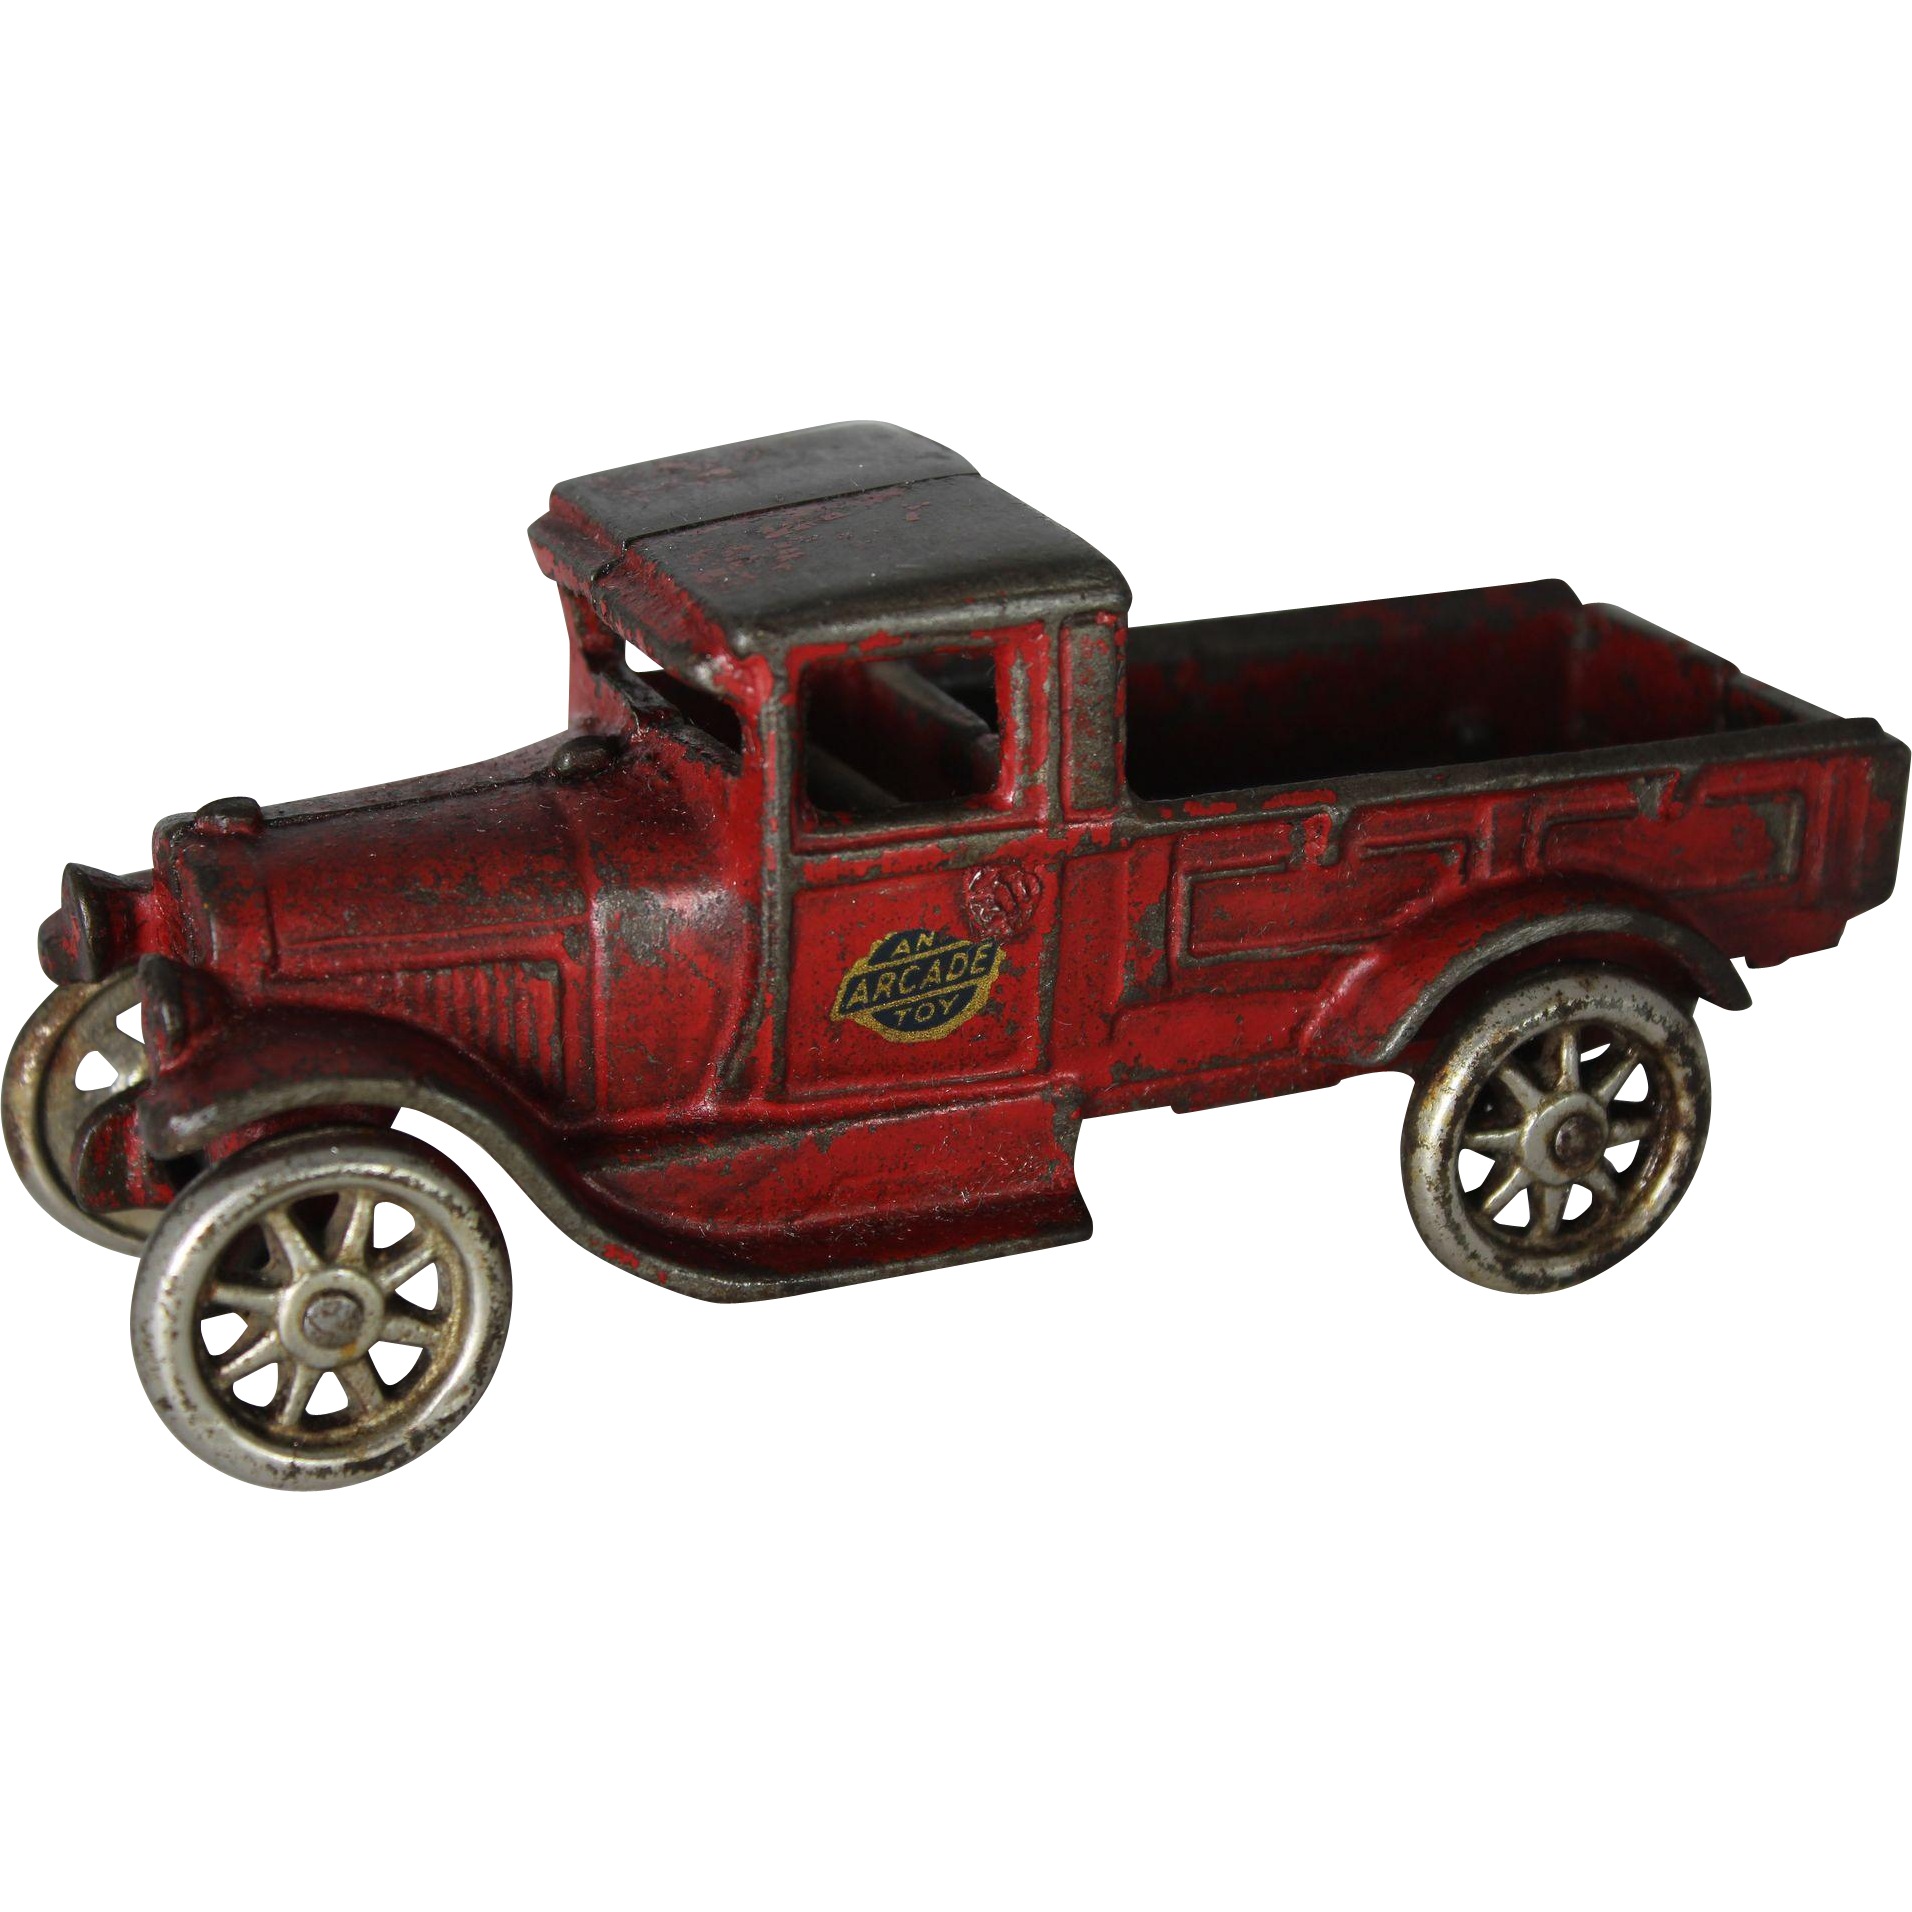 Arcade Cast Iron Ford Express Pickup Truck : The Curious American ...